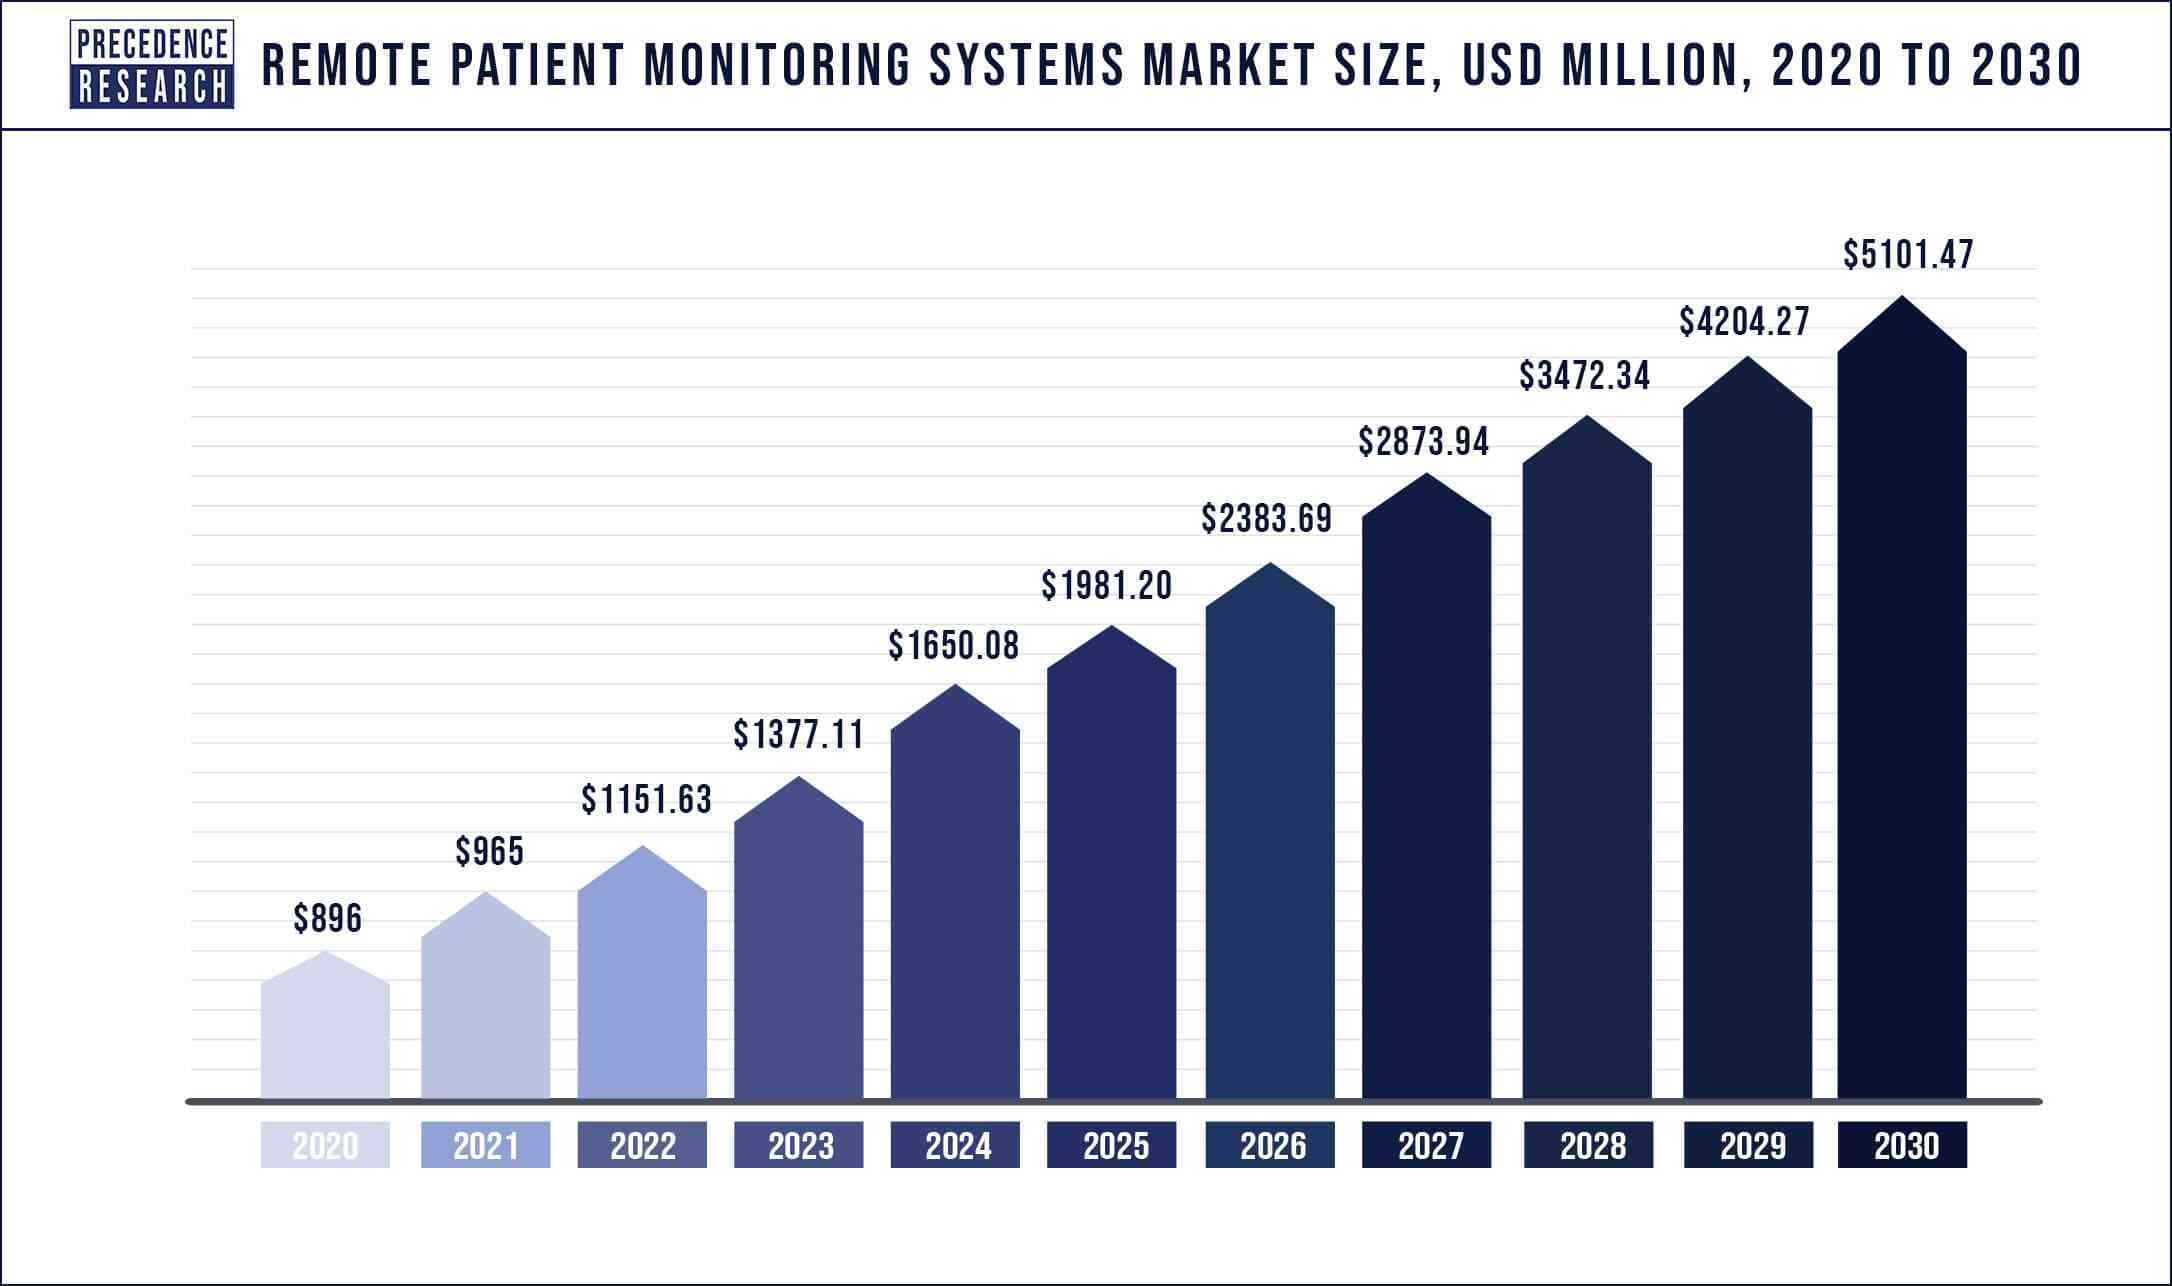 Remote Patient Monitoring Systems Market Size 2020 to 2030